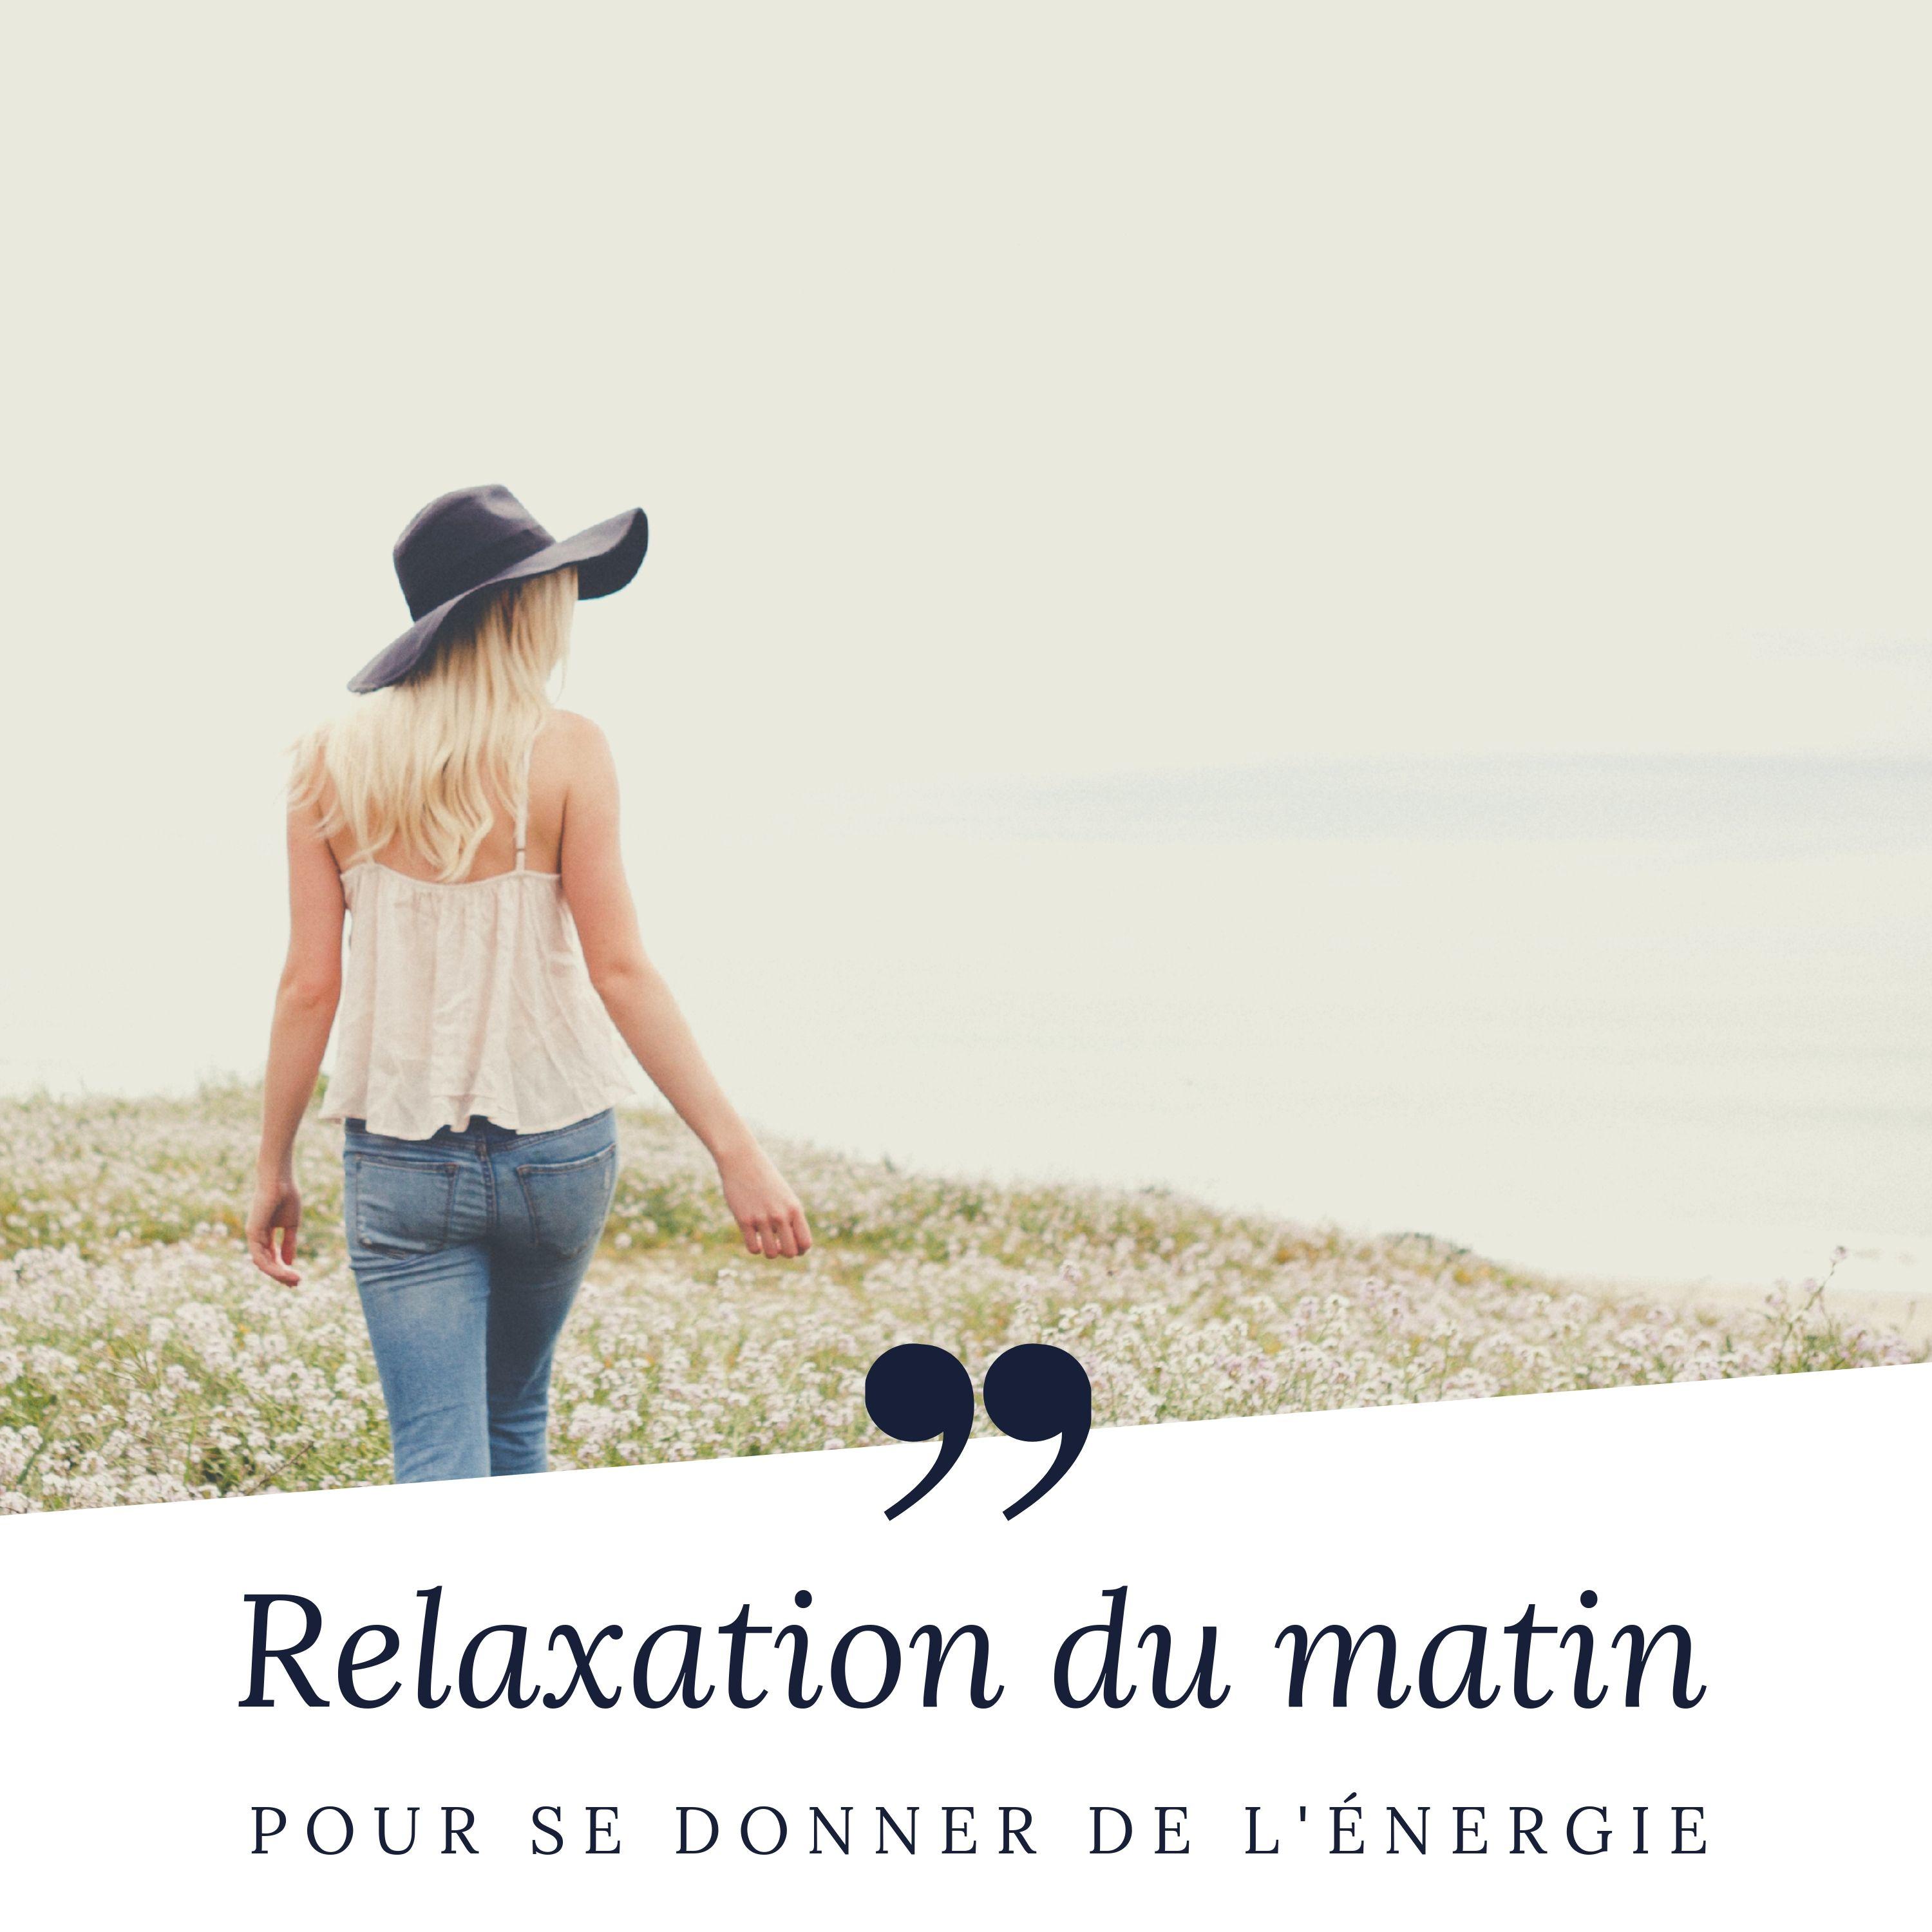 Objectif relaxation